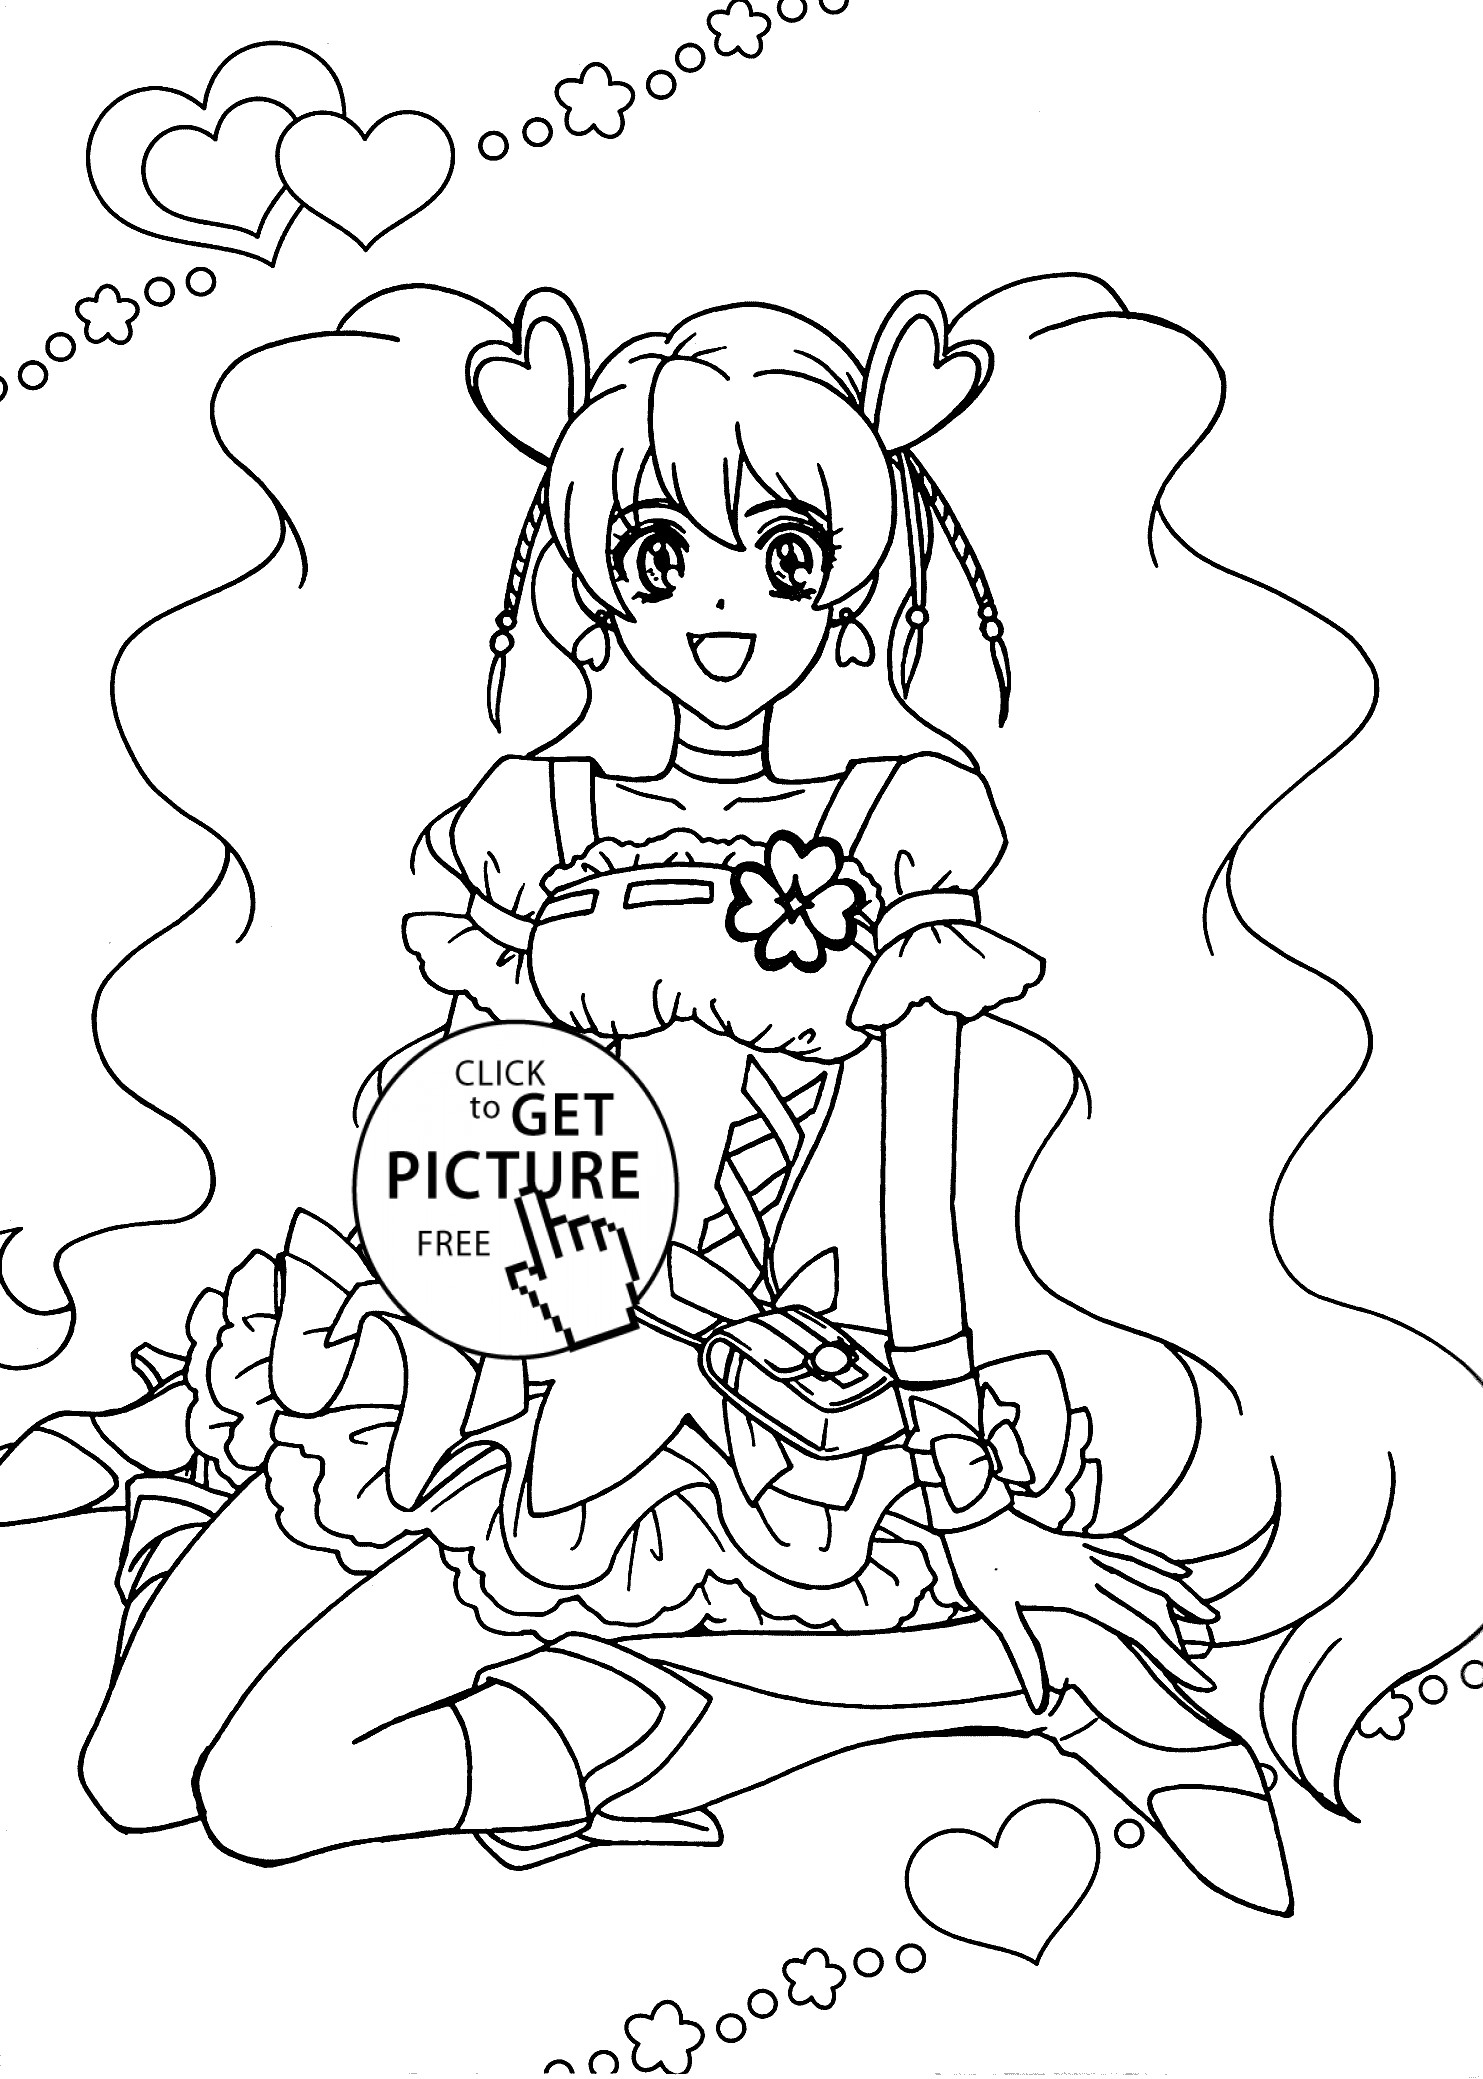 Coloring Sheets Of Girls
 Pretty cure anime girls coloring pages for kids printable